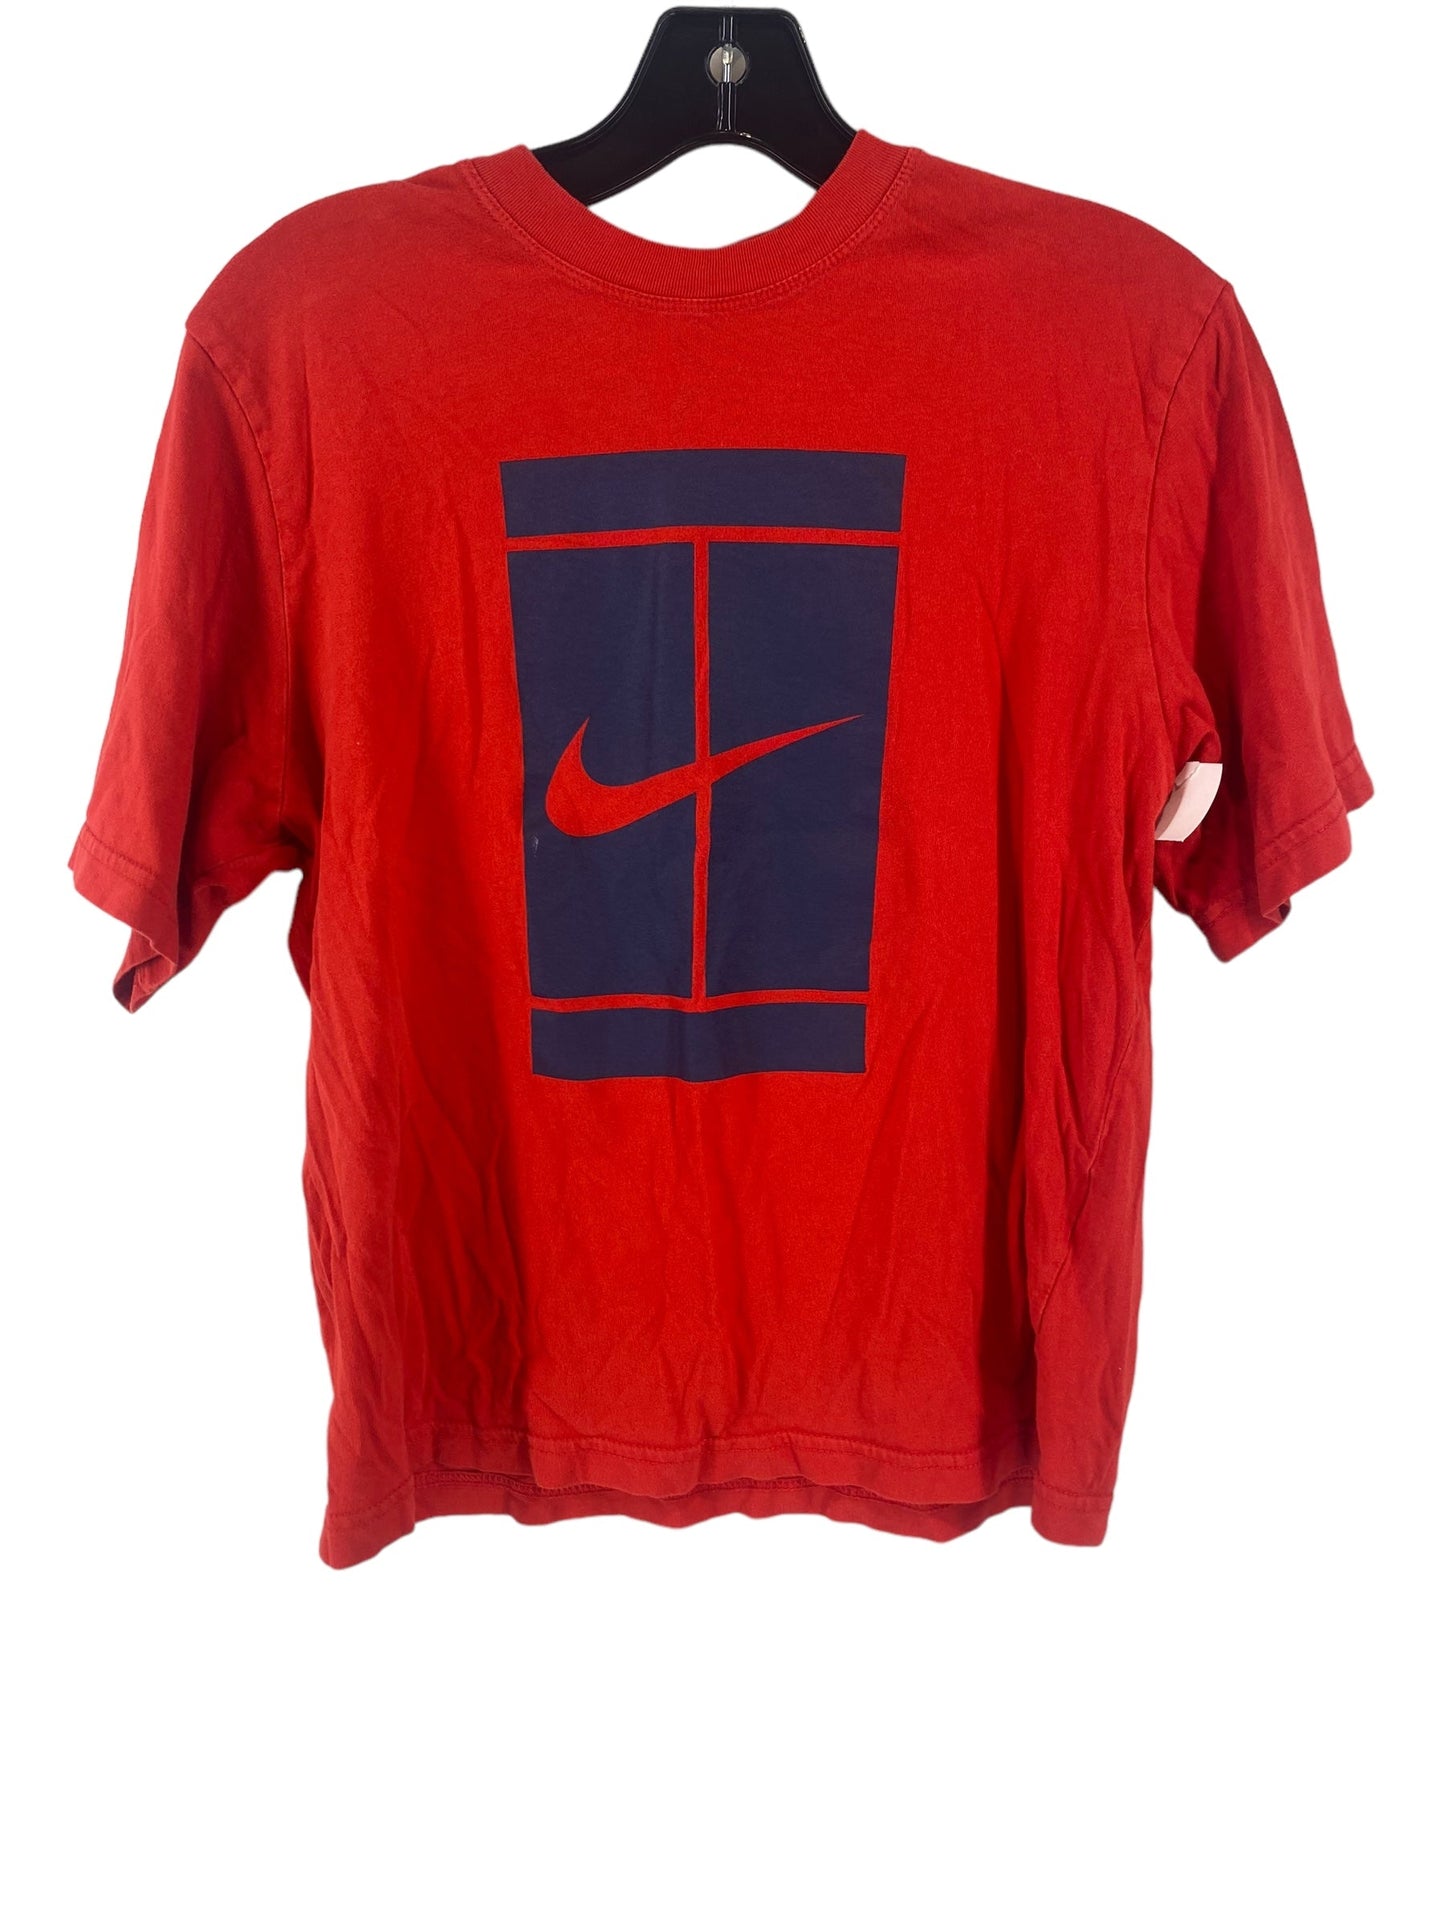 Red Athletic Top Short Sleeve Nike, Size Xs